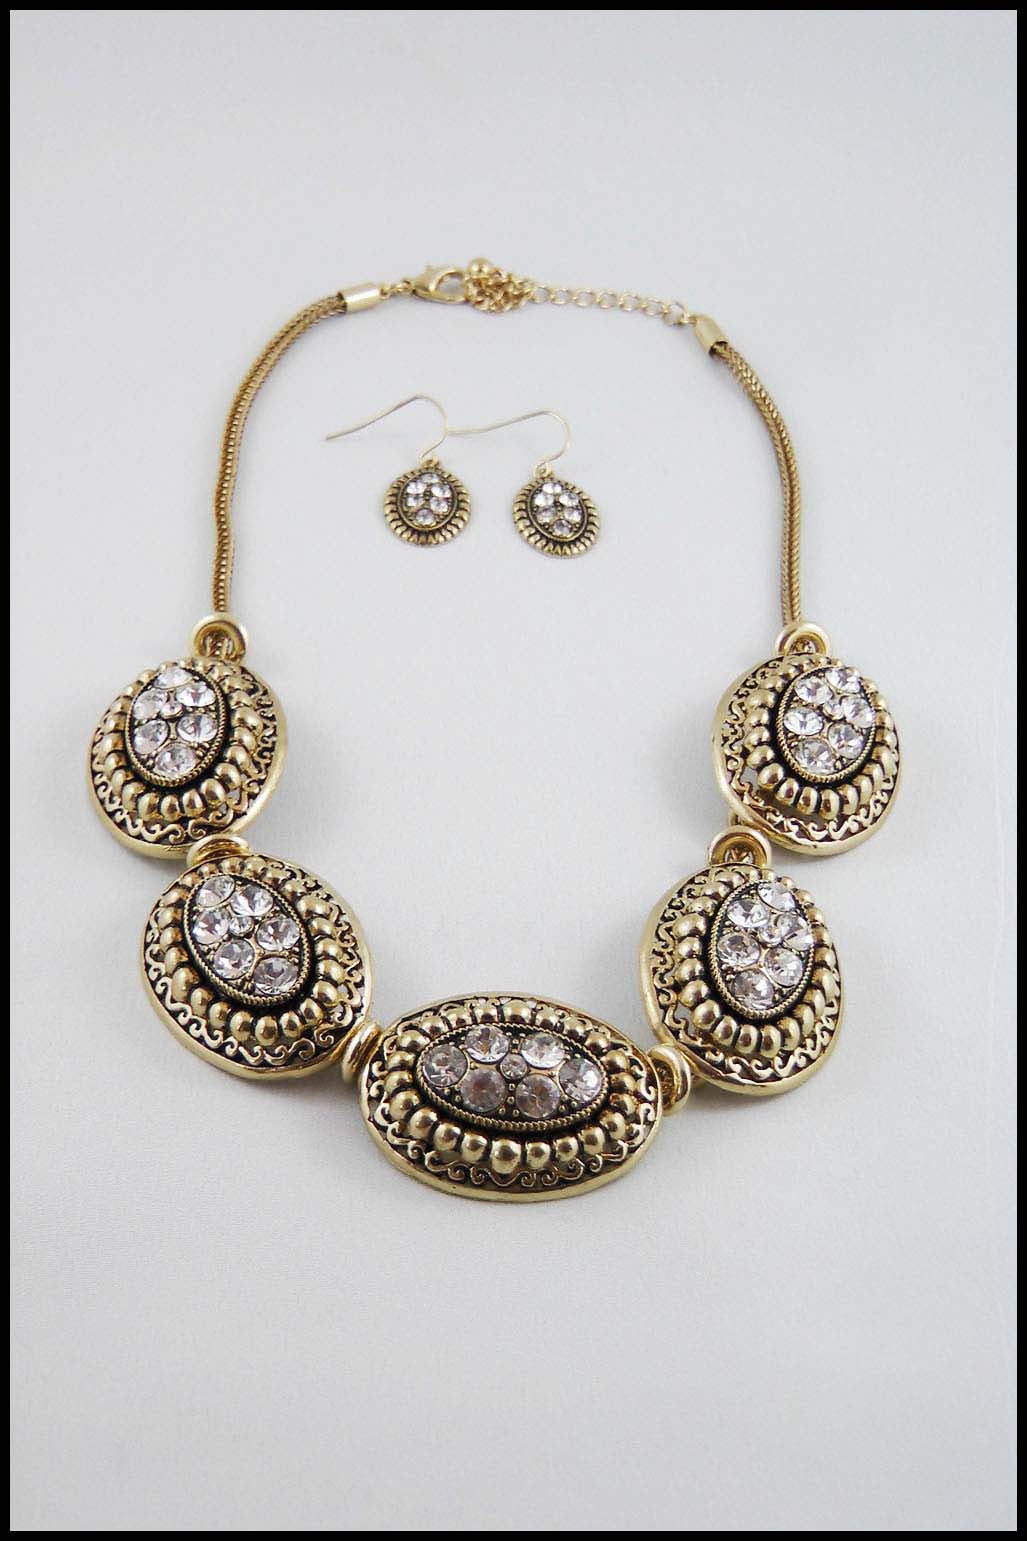 Statement Necklace and Earring Set with Bold Clusters of Clear Rhinestones